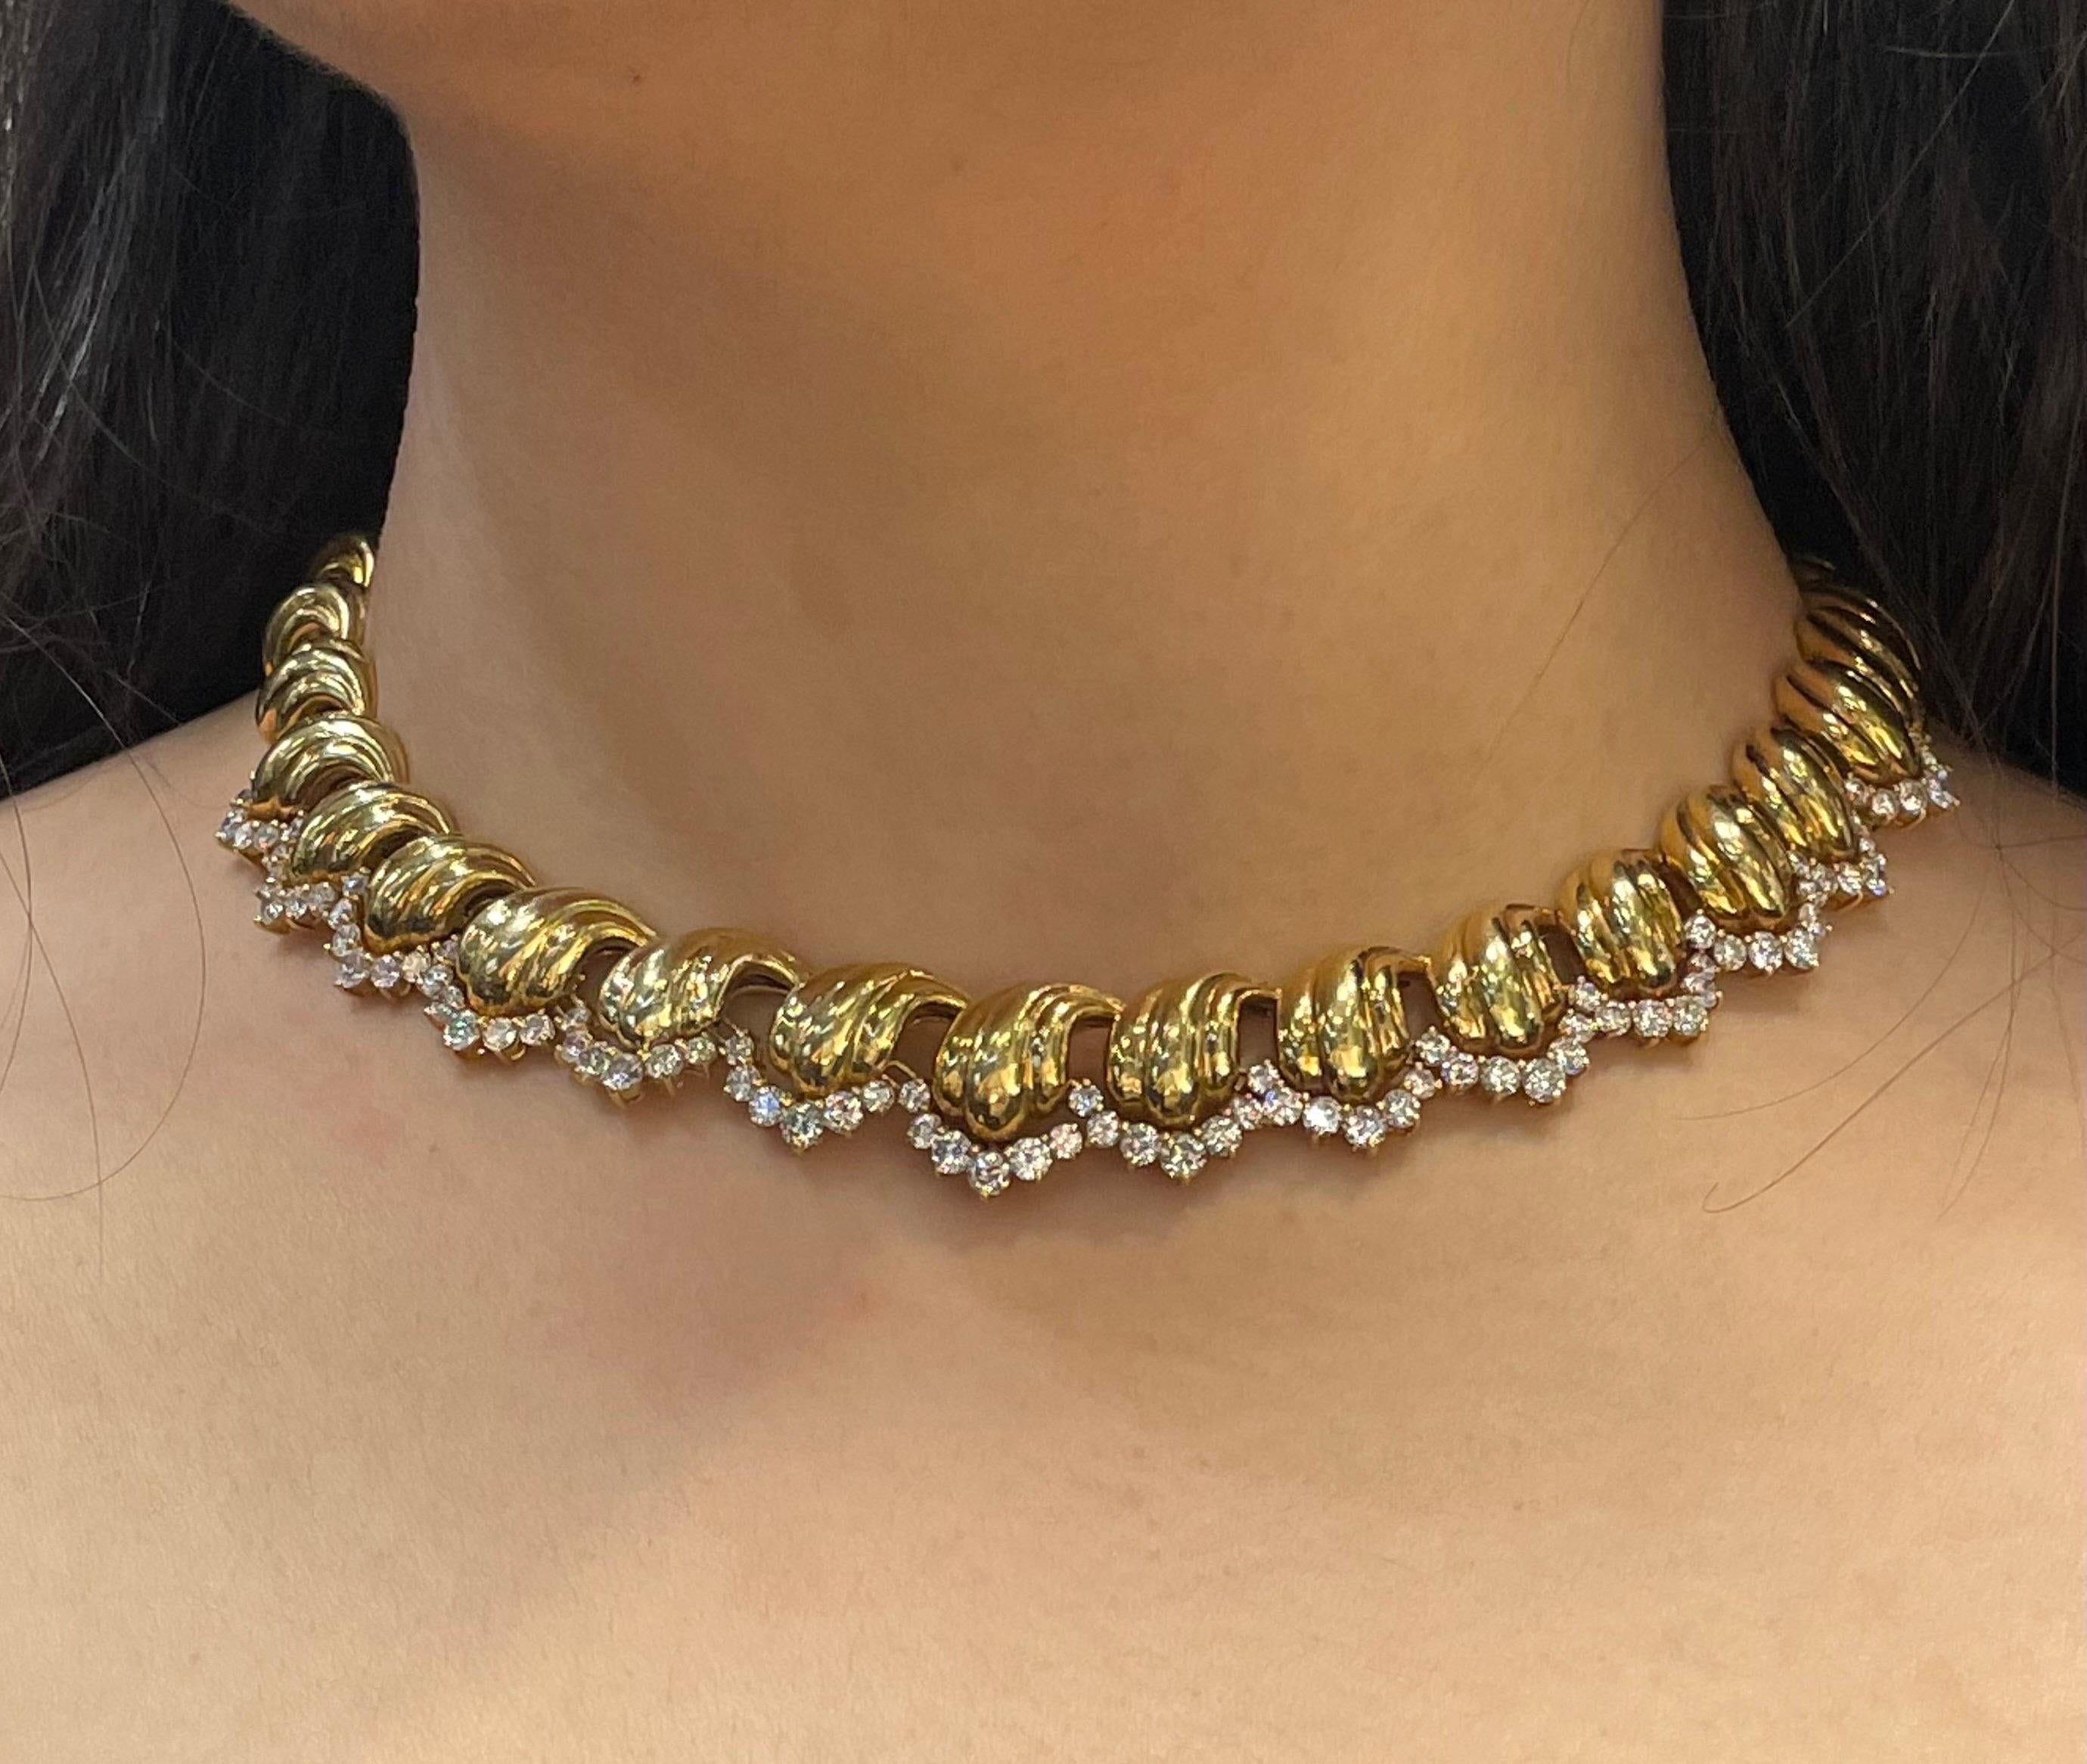 Diamond Necklace

A diamond necklace adorned with 84 round cut diamonds. 

Approximately Measures 14 inches long
Approximately weighs 103 grams
Approximate Diamond Weight: 7.7 carats
Metal Type: 18 Karat Gold